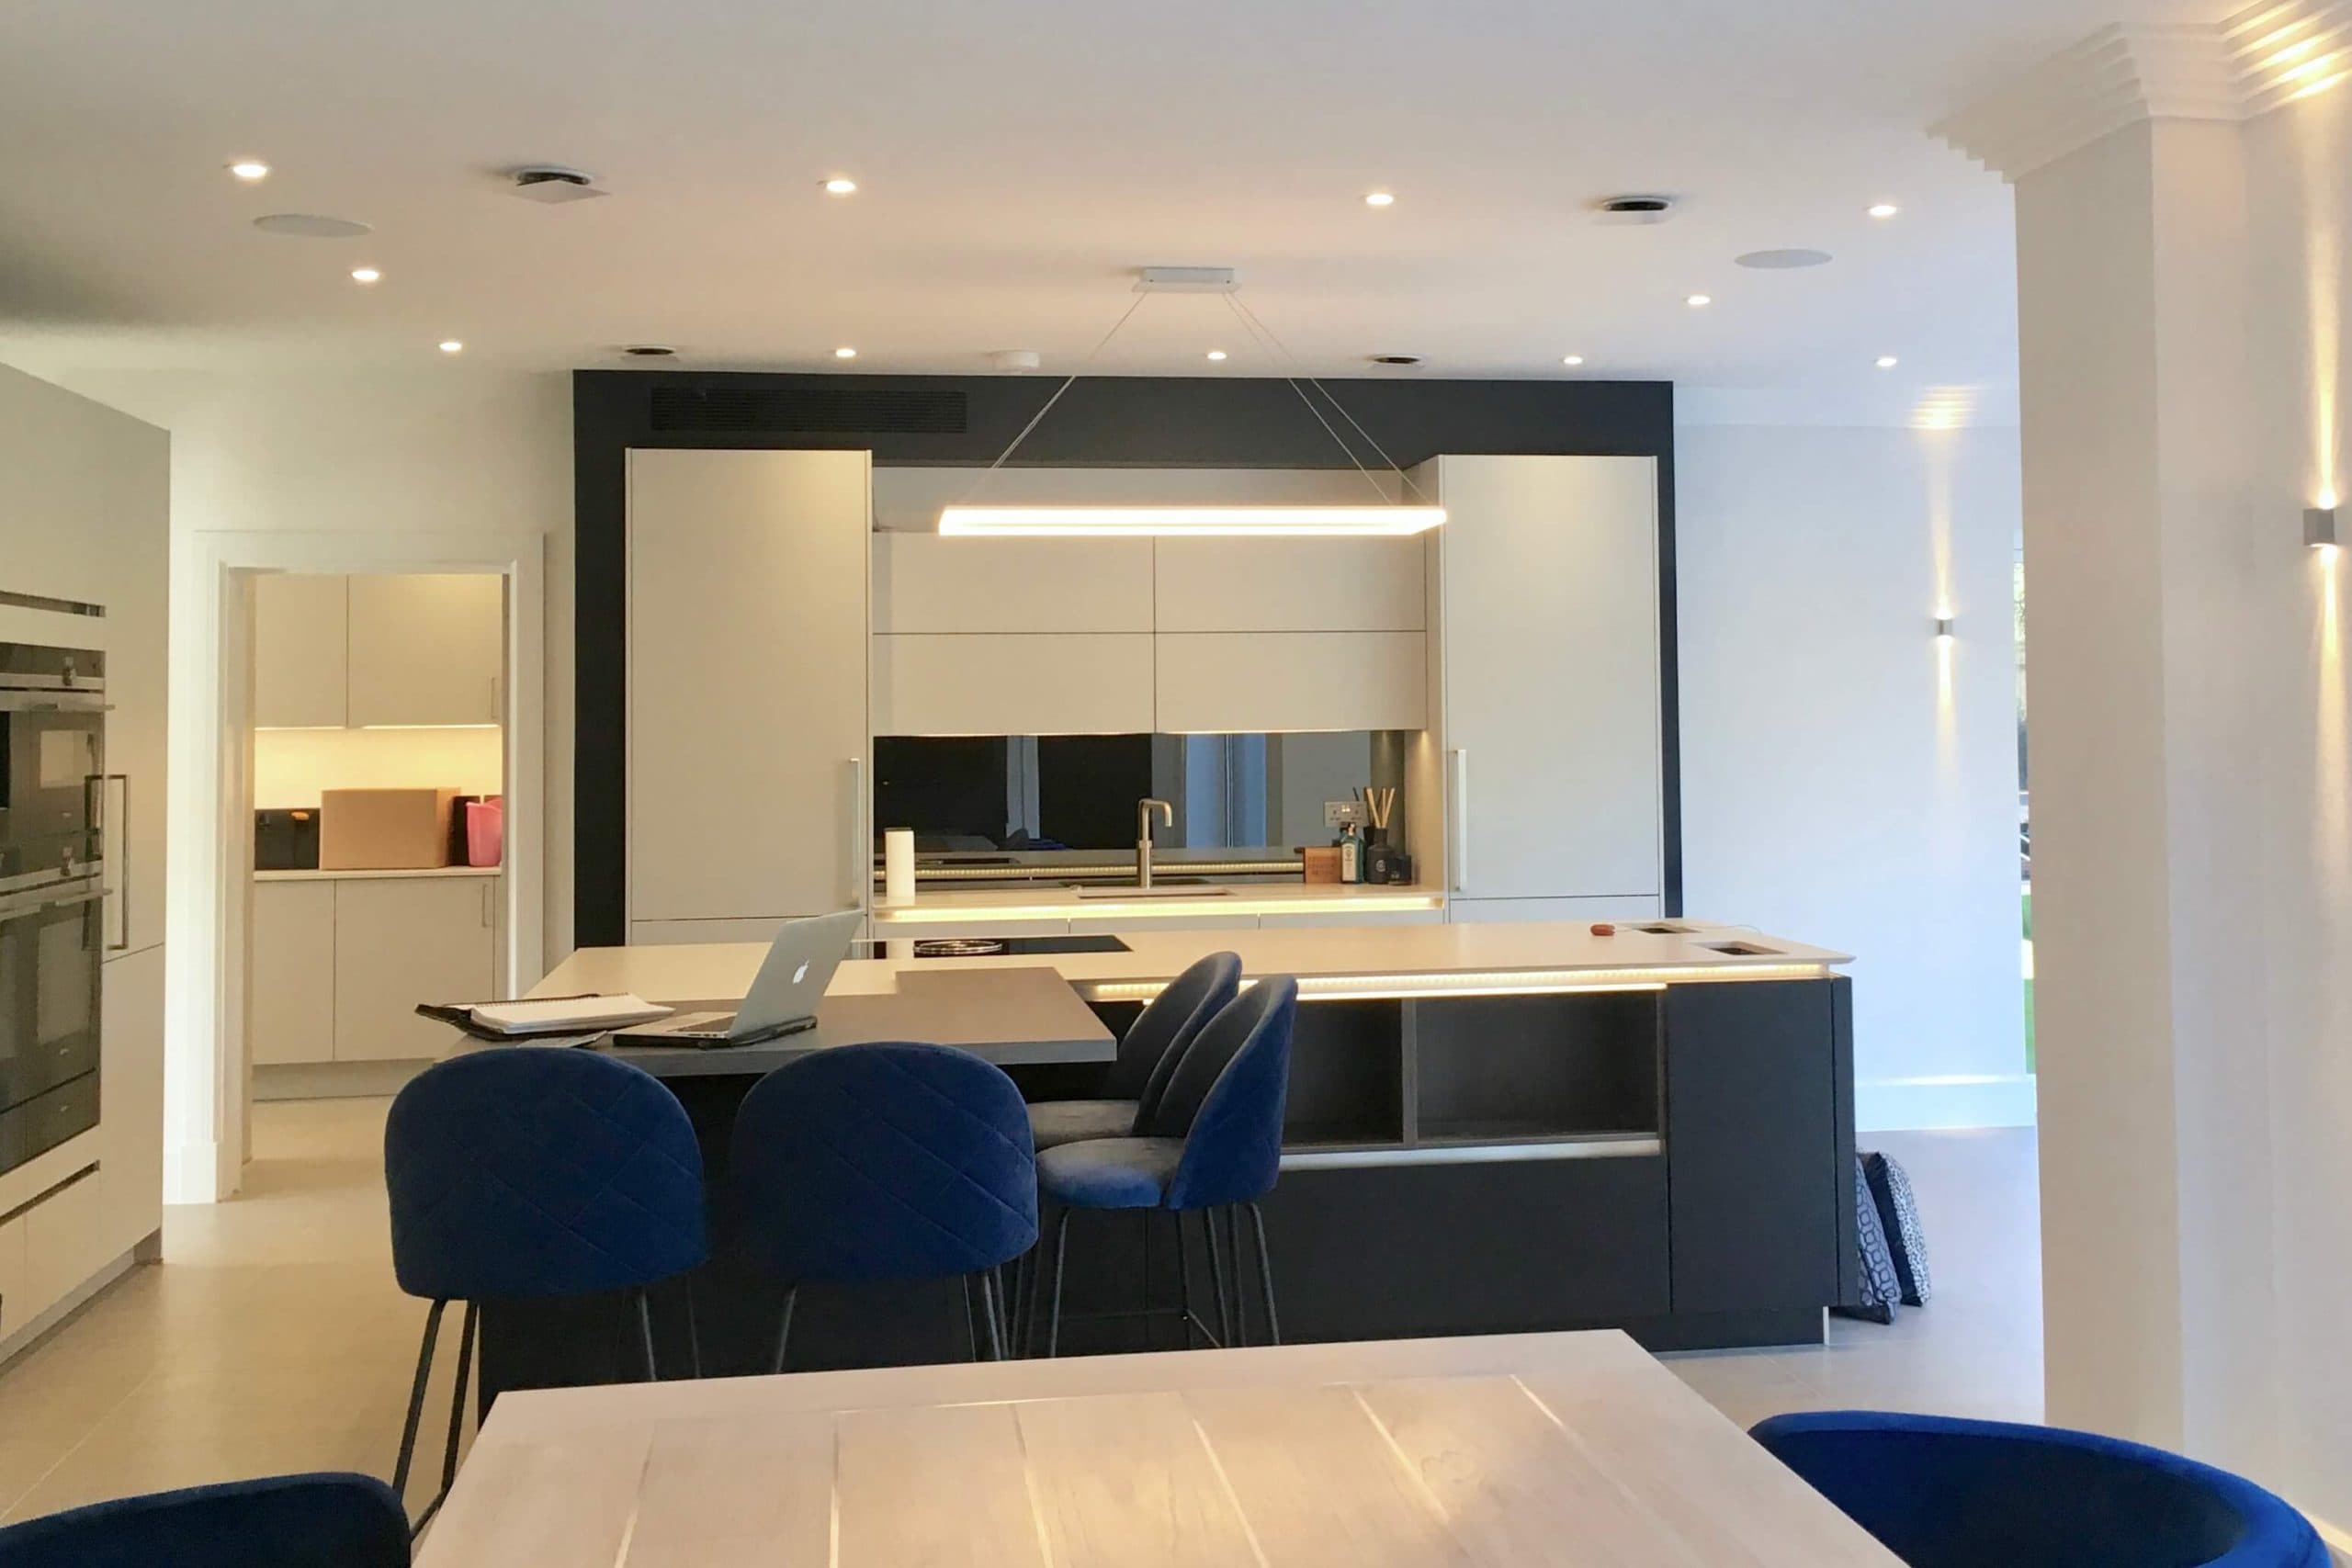 Scandia Hus new build kitchen with invisible Mitsubishi air con grill and MVHR system by SubCool FM view from dining area